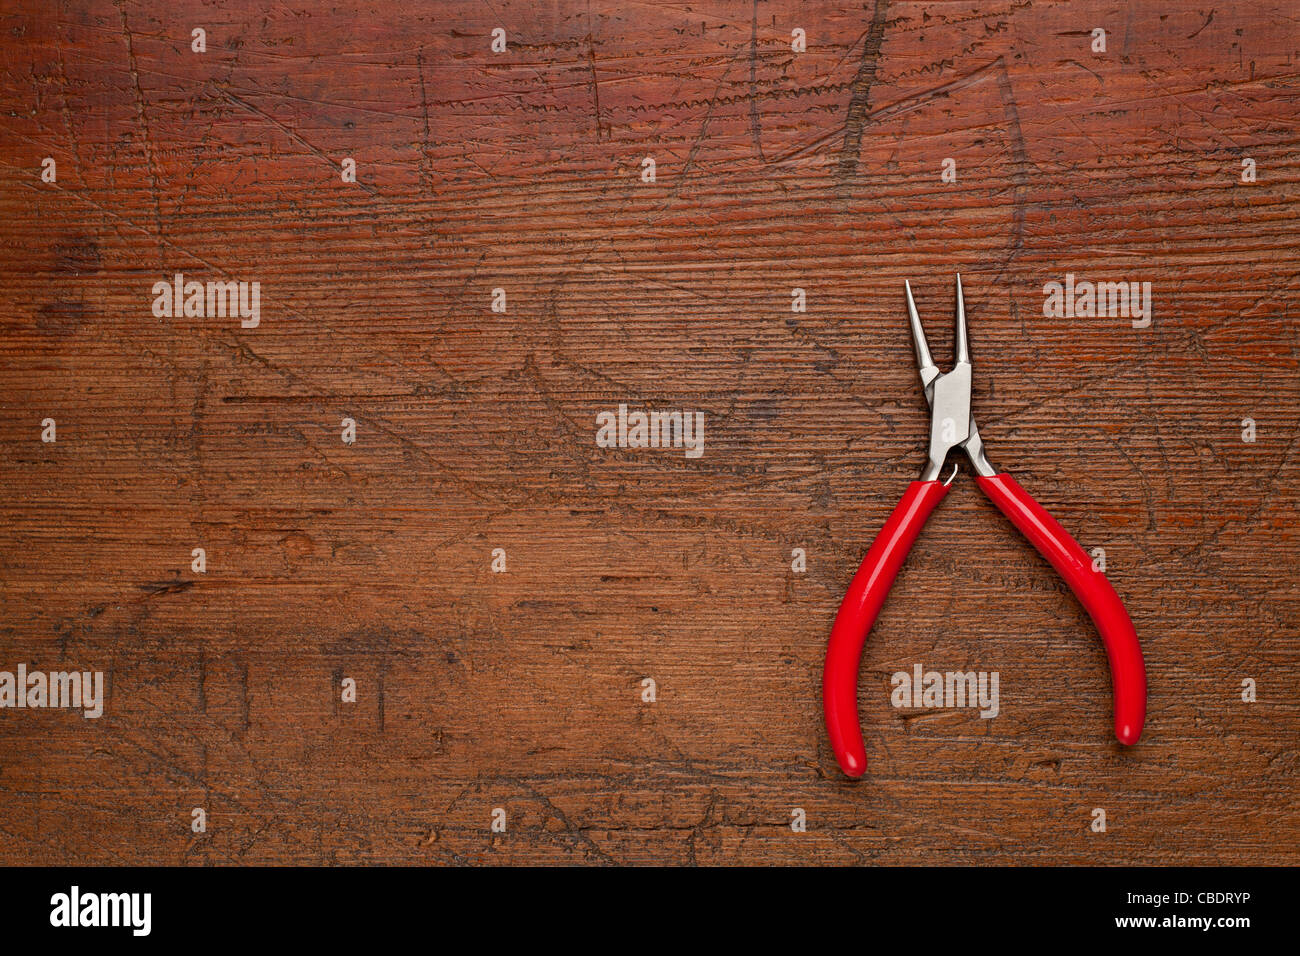 small needle nose pliers on a scratched and weathered wood background Stock Photo